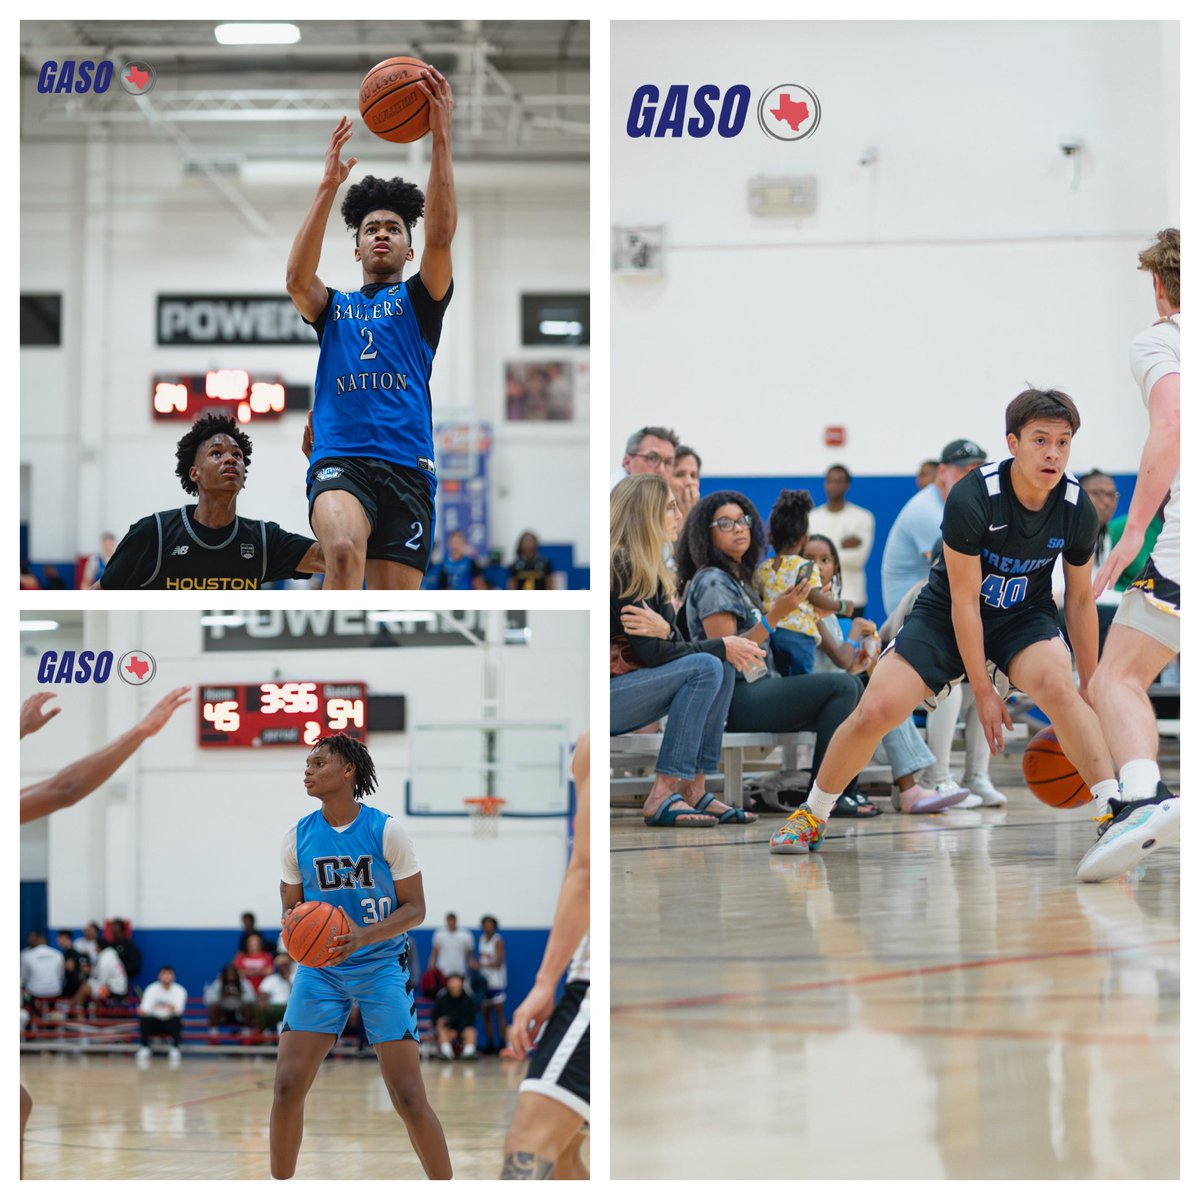 Some more Saturday Gems Amare Guerra @SAPremierHoops elevates his teams level of play with his ability to score it and get others involved Derek Hollman @MustangsNation has been a load to deal with inside Kenson Anderson - has been explosive.